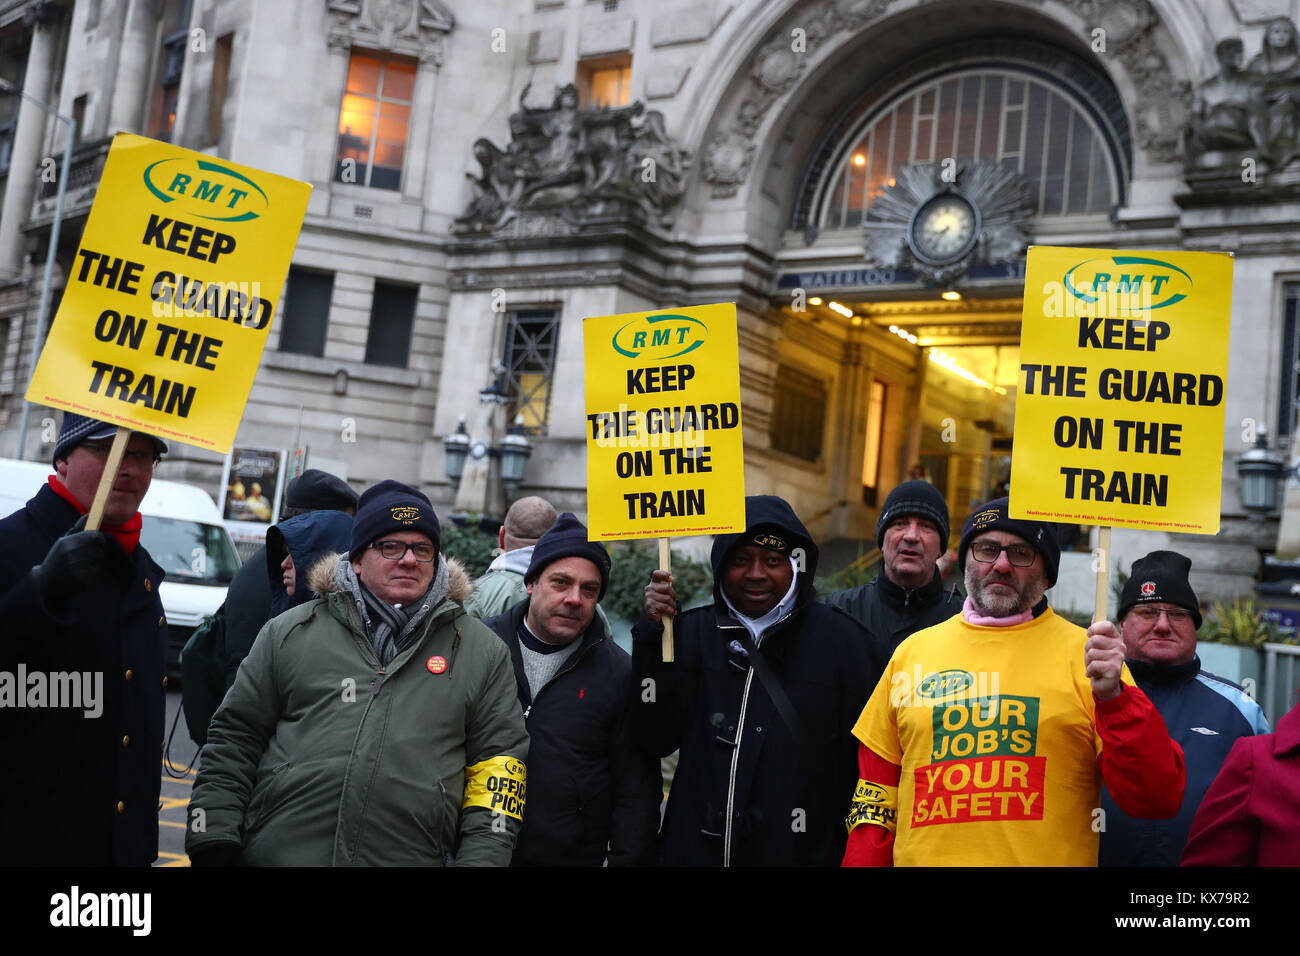 London, London, UK. 8th Jan, 2018. Rail, Maritime and Transport (RMT) union members hold placards at Waterloo Station as Northern, Merseyrail, South Western Railway and Greater Anglia workers went on strike over separate issues including the role of train guards and the extension of driver-only services, in London, Britain on Jan. 8, 2018. Credit: Tim Ireland/Xinhua/Alamy Live News Stock Photo